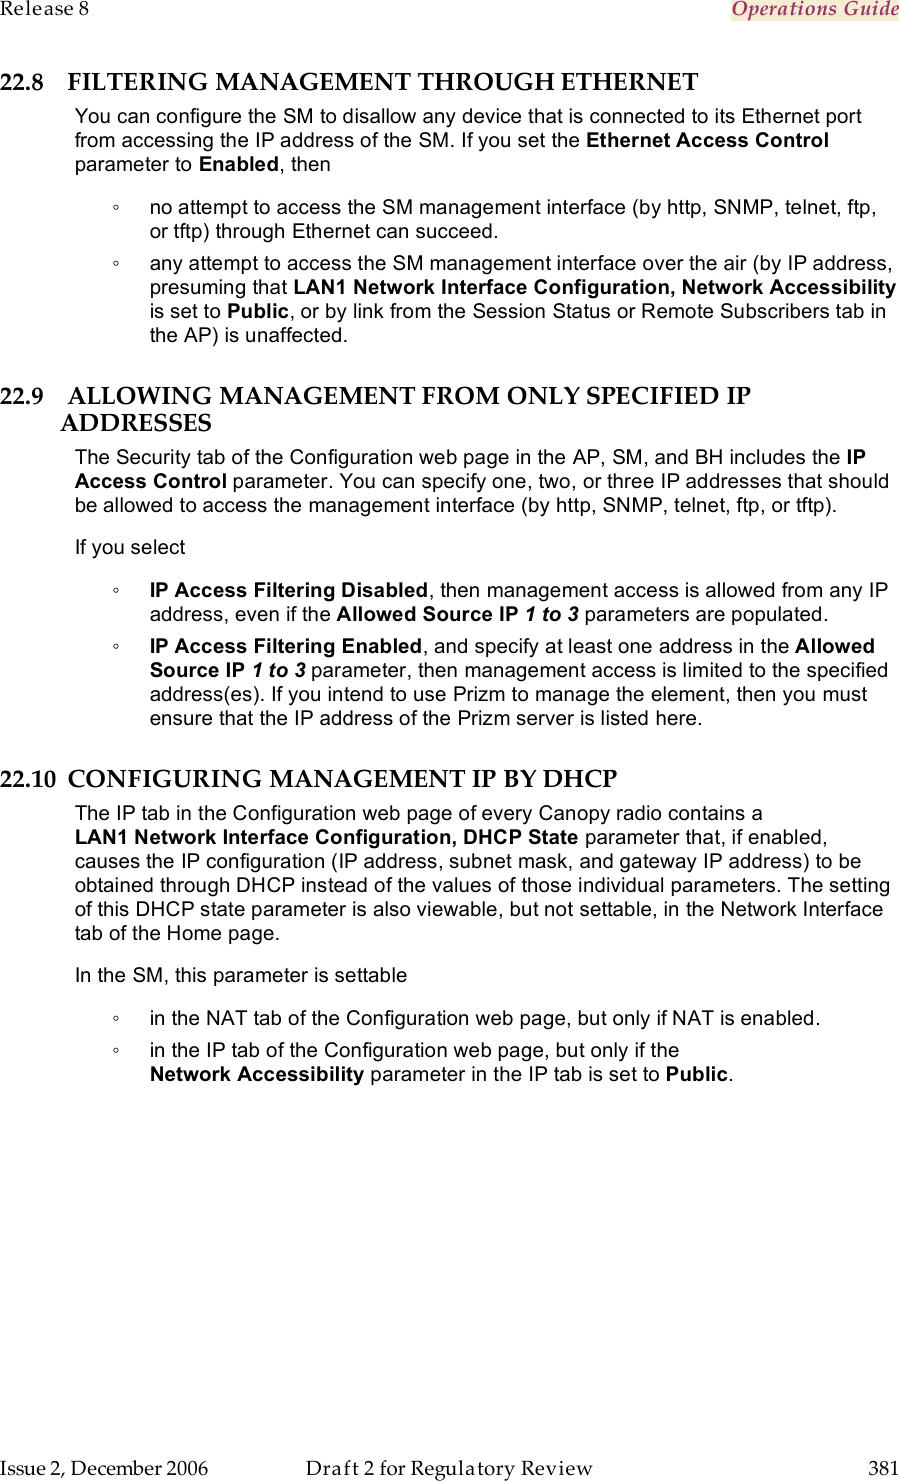 Release 8    Operations Guide   Issue 2, December 2006  Draft 2 for Regulatory Review  381     22.8 FILTERING MANAGEMENT THROUGH ETHERNET You can configure the SM to disallow any device that is connected to its Ethernet port from accessing the IP address of the SM. If you set the Ethernet Access Control parameter to Enabled, then ◦  no attempt to access the SM management interface (by http, SNMP, telnet, ftp, or tftp) through Ethernet can succeed. ◦  any attempt to access the SM management interface over the air (by IP address, presuming that LAN1 Network Interface Configuration, Network Accessibility is set to Public, or by link from the Session Status or Remote Subscribers tab in the AP) is unaffected. 22.9 ALLOWING MANAGEMENT FROM ONLY SPECIFIED IP ADDRESSES The Security tab of the Configuration web page in the AP, SM, and BH includes the IP Access Control parameter. You can specify one, two, or three IP addresses that should be allowed to access the management interface (by http, SNMP, telnet, ftp, or tftp).  If you select ◦ IP Access Filtering Disabled, then management access is allowed from any IP address, even if the Allowed Source IP 1 to 3 parameters are populated. ◦ IP Access Filtering Enabled, and specify at least one address in the Allowed Source IP 1 to 3 parameter, then management access is limited to the specified address(es). If you intend to use Prizm to manage the element, then you must ensure that the IP address of the Prizm server is listed here.  22.10 CONFIGURING MANAGEMENT IP BY DHCP The IP tab in the Configuration web page of every Canopy radio contains a LAN1 Network Interface Configuration, DHCP State parameter that, if enabled, causes the IP configuration (IP address, subnet mask, and gateway IP address) to be obtained through DHCP instead of the values of those individual parameters. The setting of this DHCP state parameter is also viewable, but not settable, in the Network Interface tab of the Home page.  In the SM, this parameter is settable ◦  in the NAT tab of the Configuration web page, but only if NAT is enabled. ◦  in the IP tab of the Configuration web page, but only if the Network Accessibility parameter in the IP tab is set to Public. 